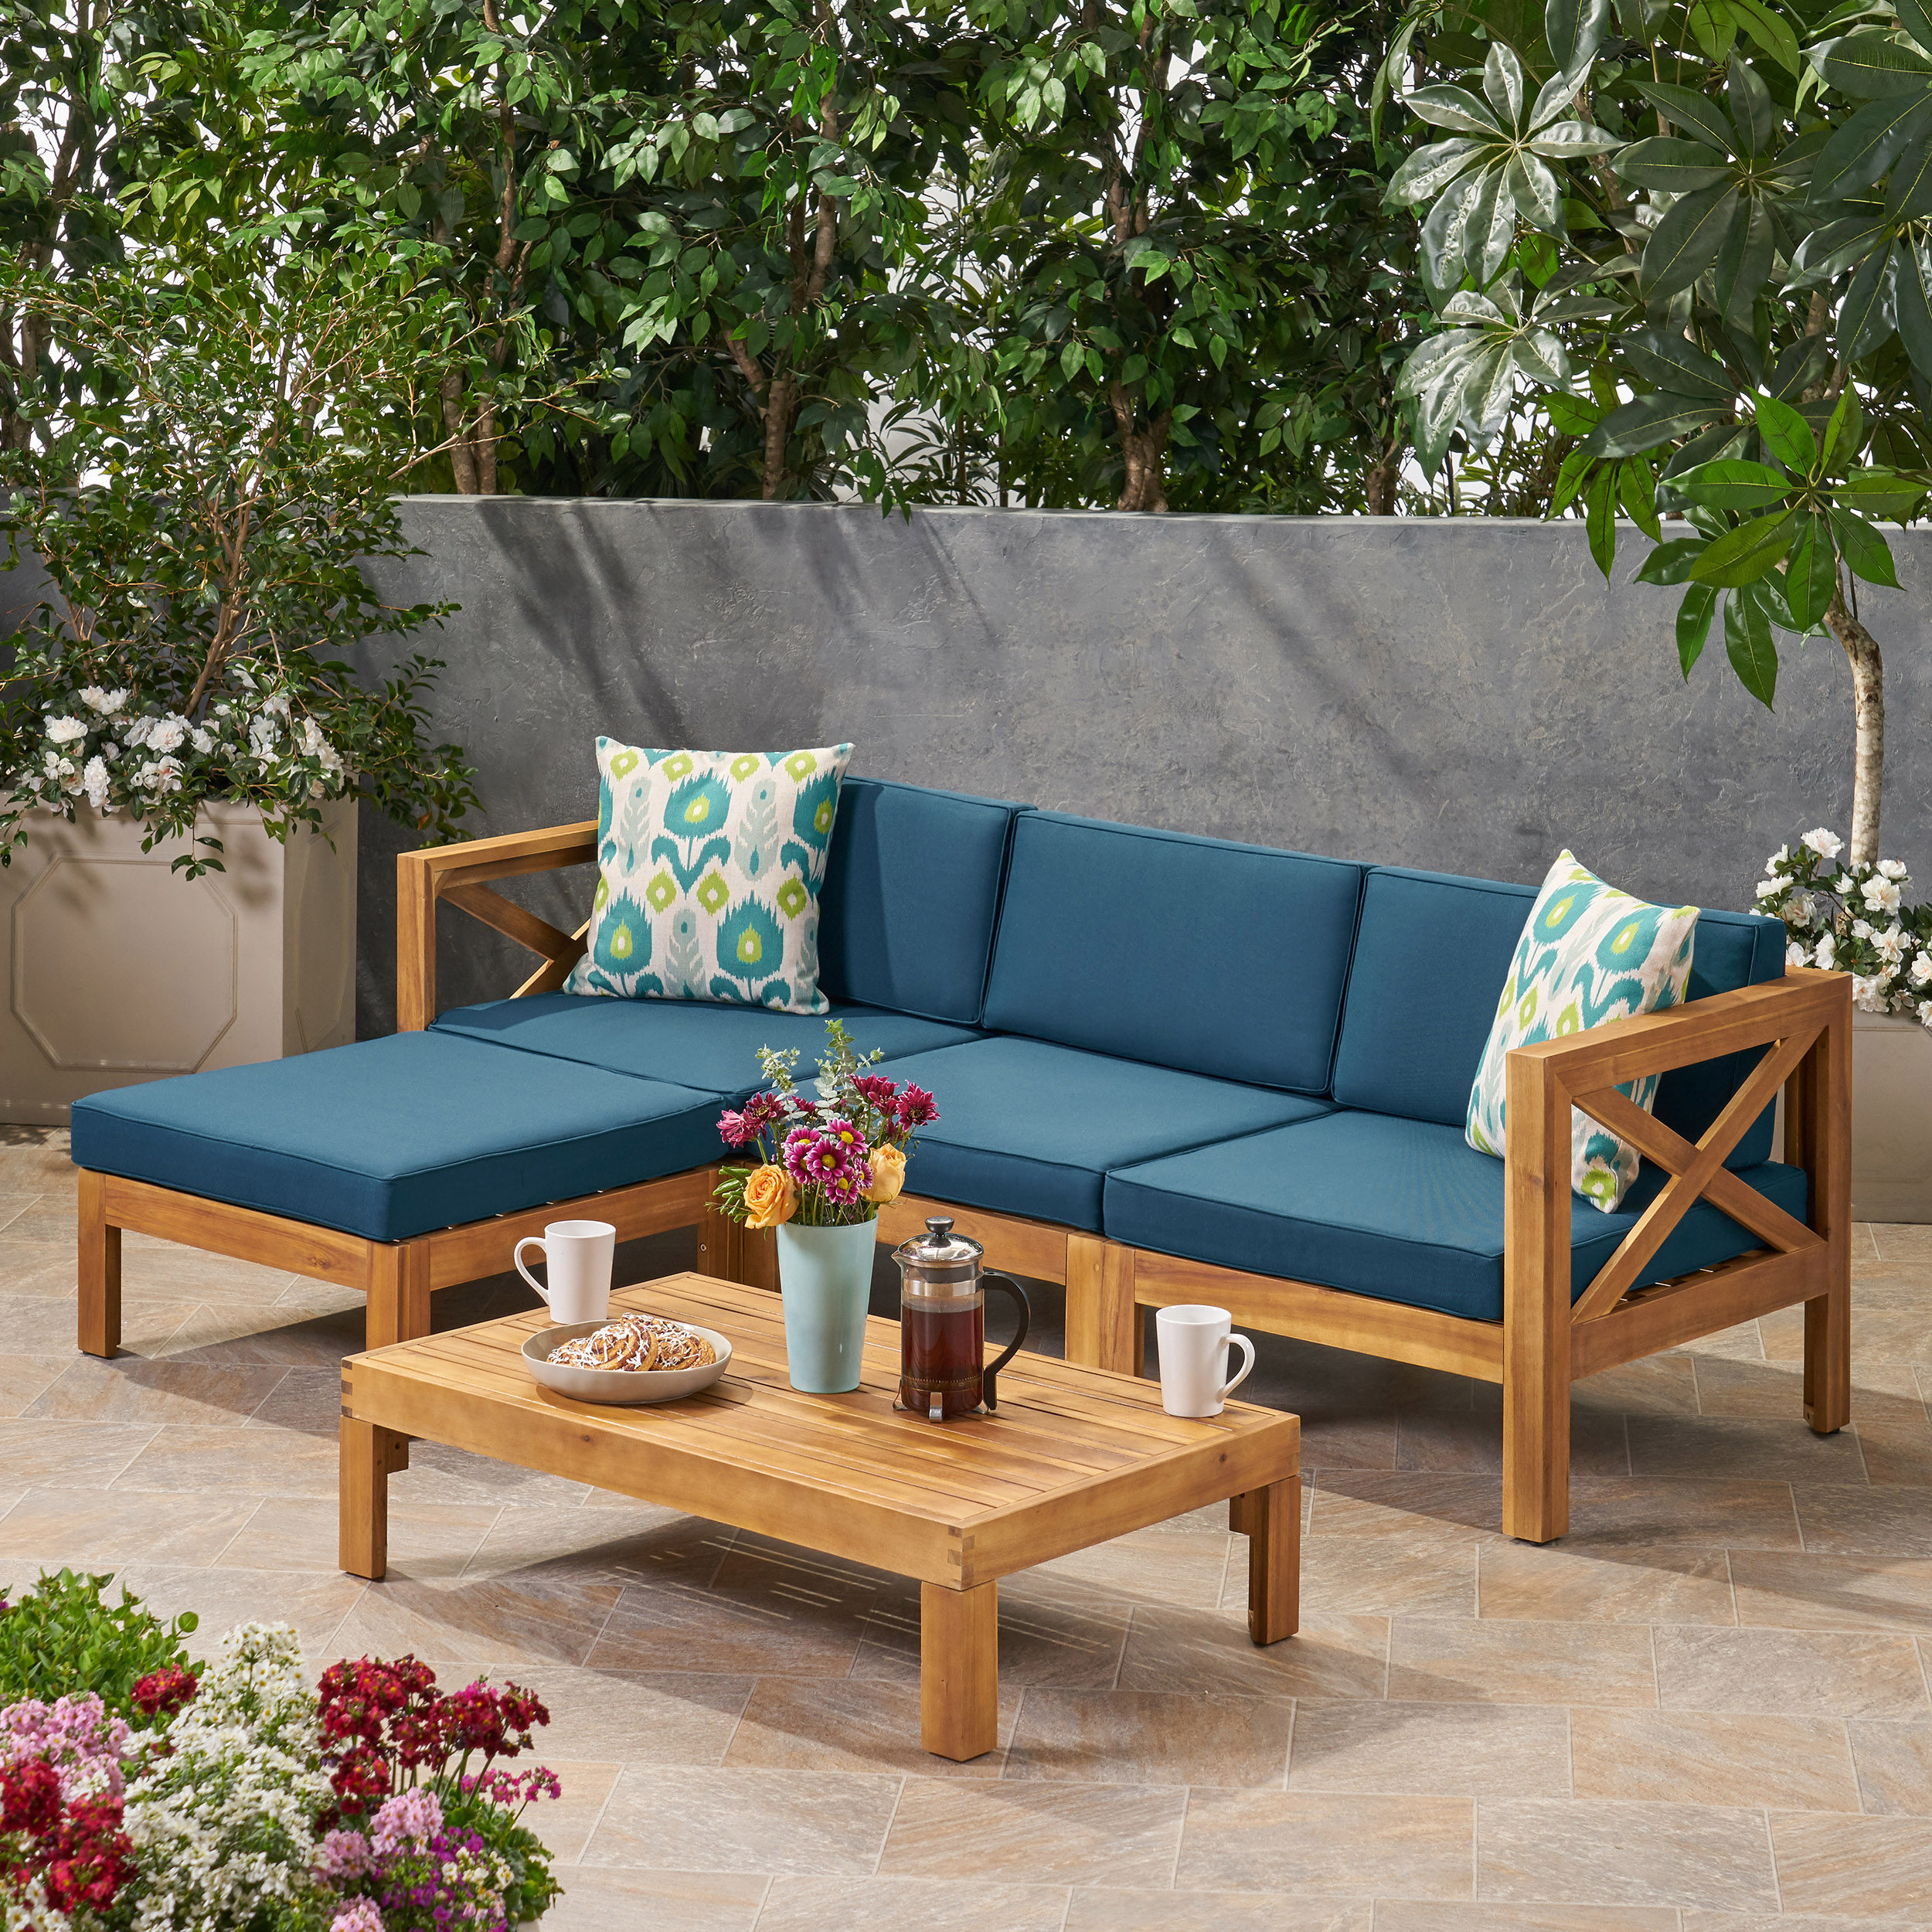 Mamie Outdoor Acacia Wood 5 Piece 3-Seater Sectional Sofa Set, Teak and Dark Teal - image 2 of 15